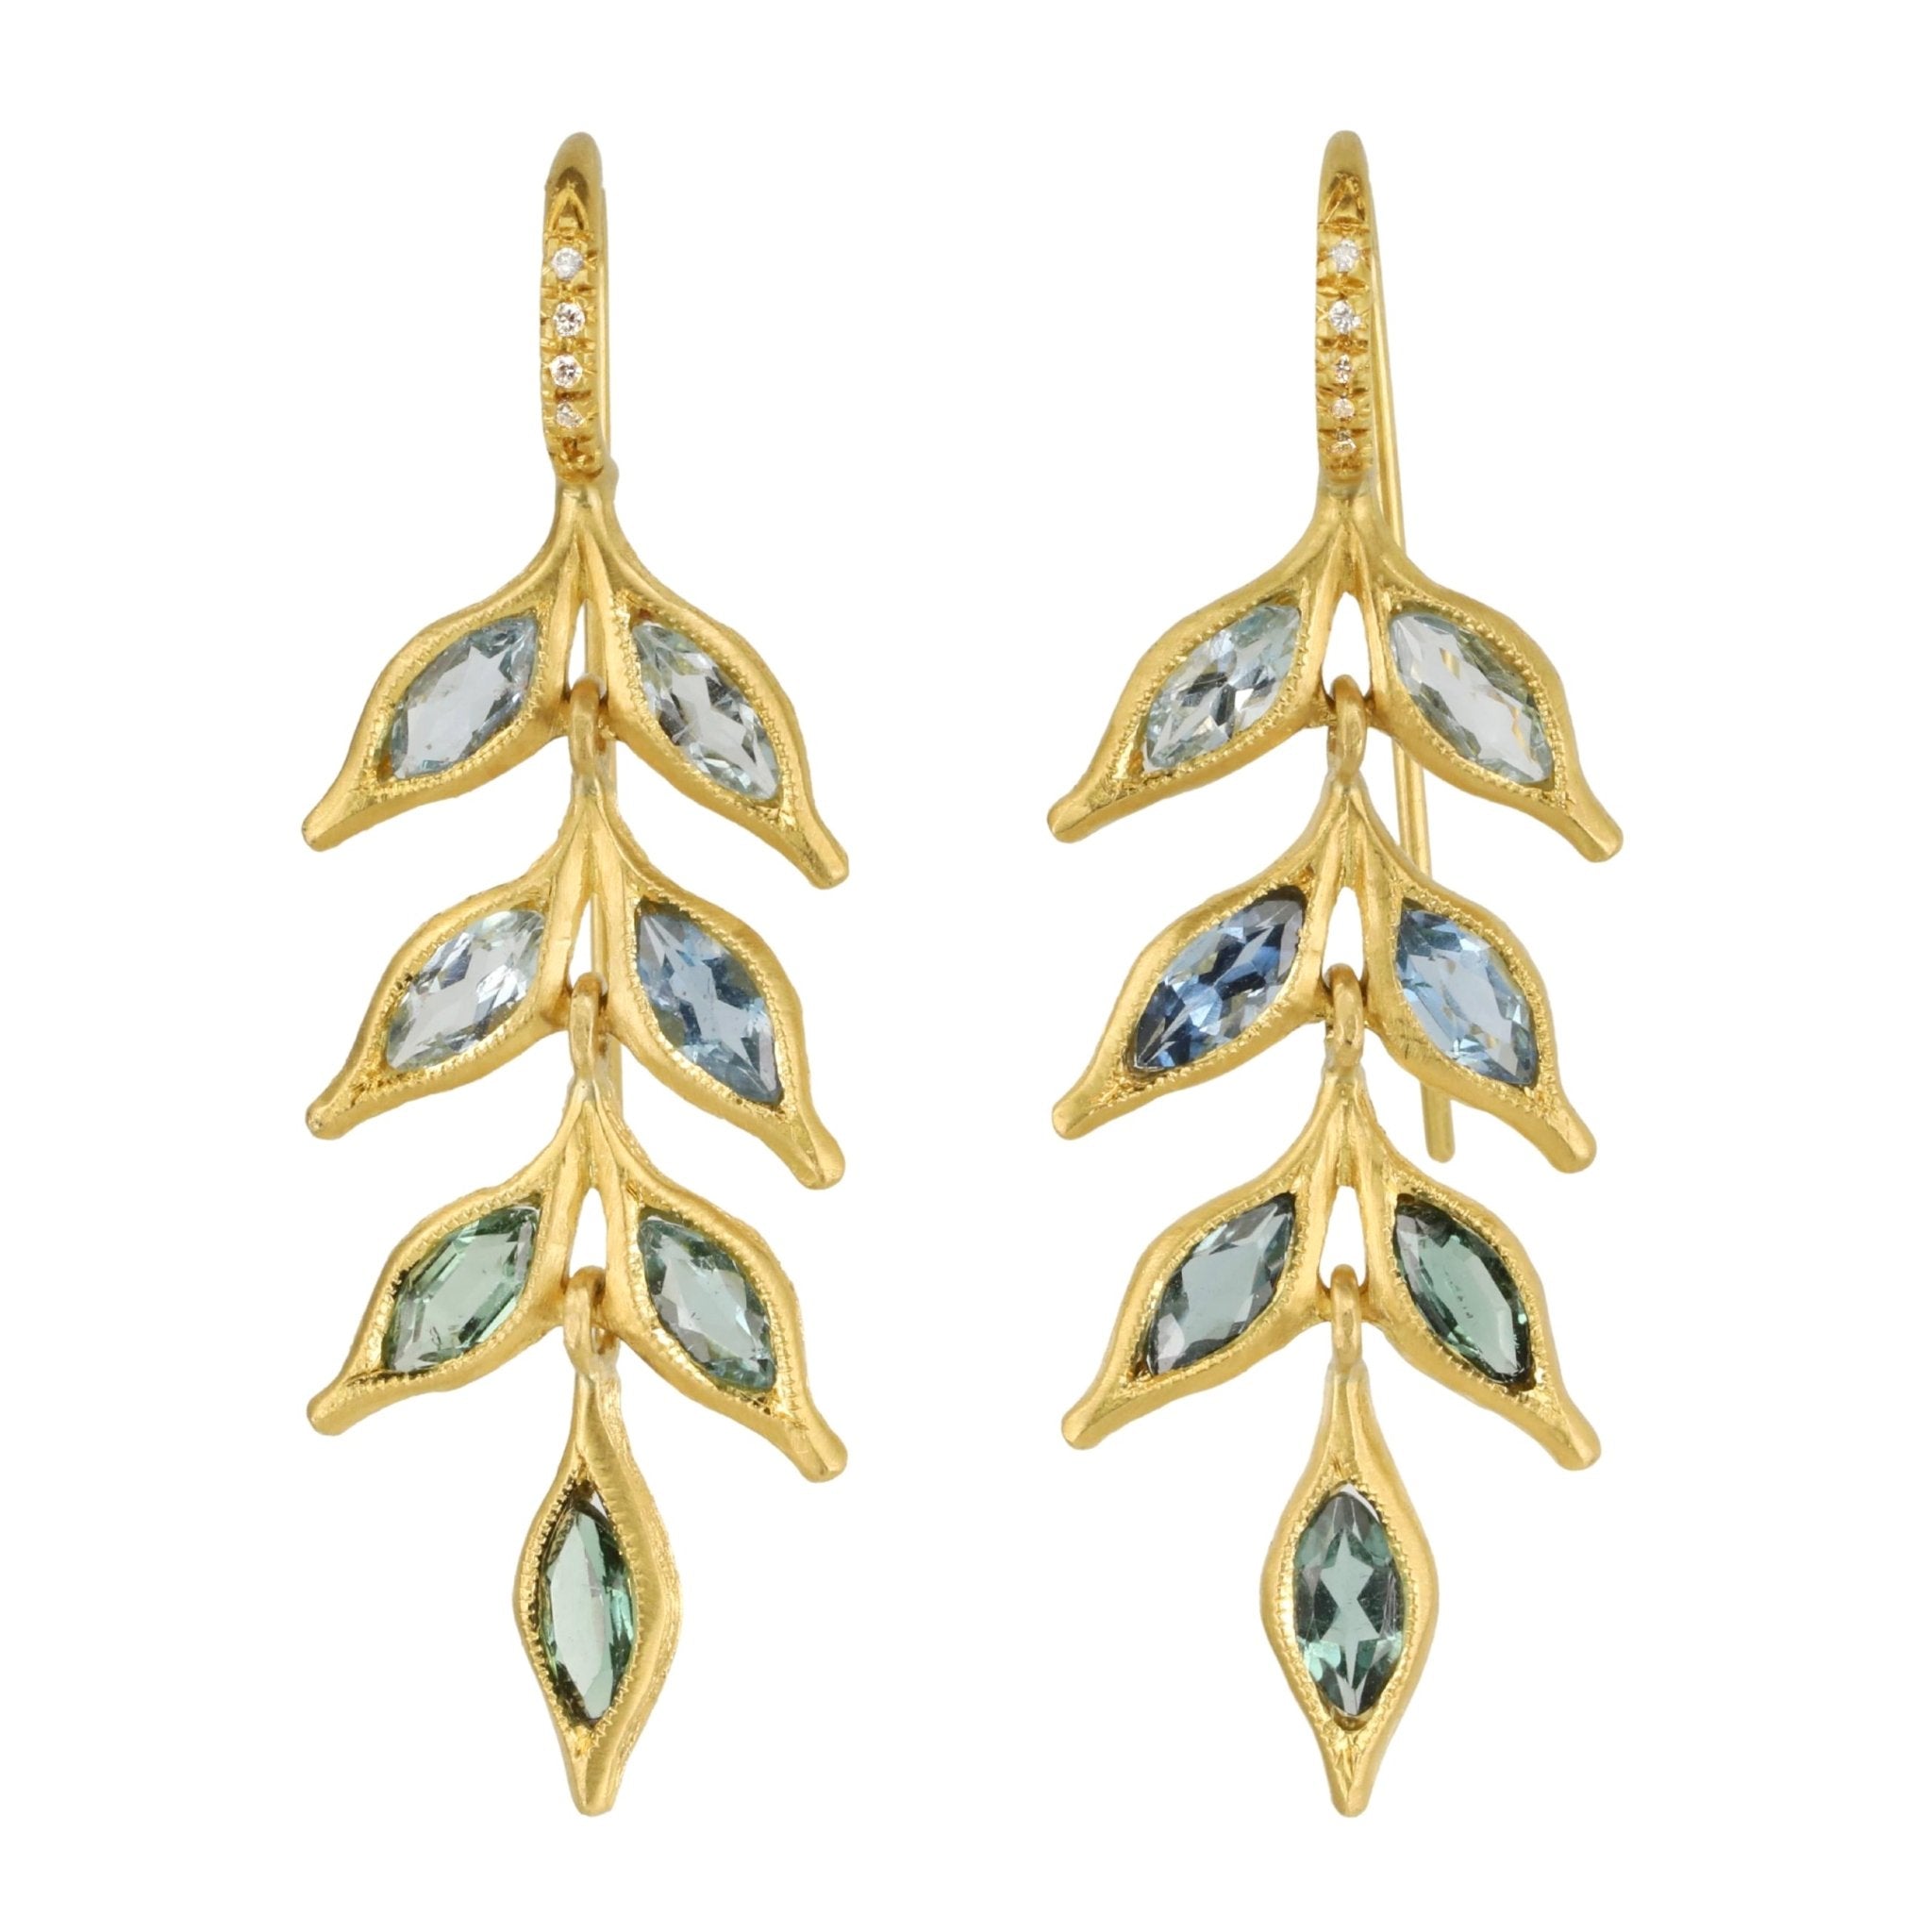 Cathy Waterman 22K Gold Aqua and Tourmaline Falling Leaf Earrings with White Pave Diamonds